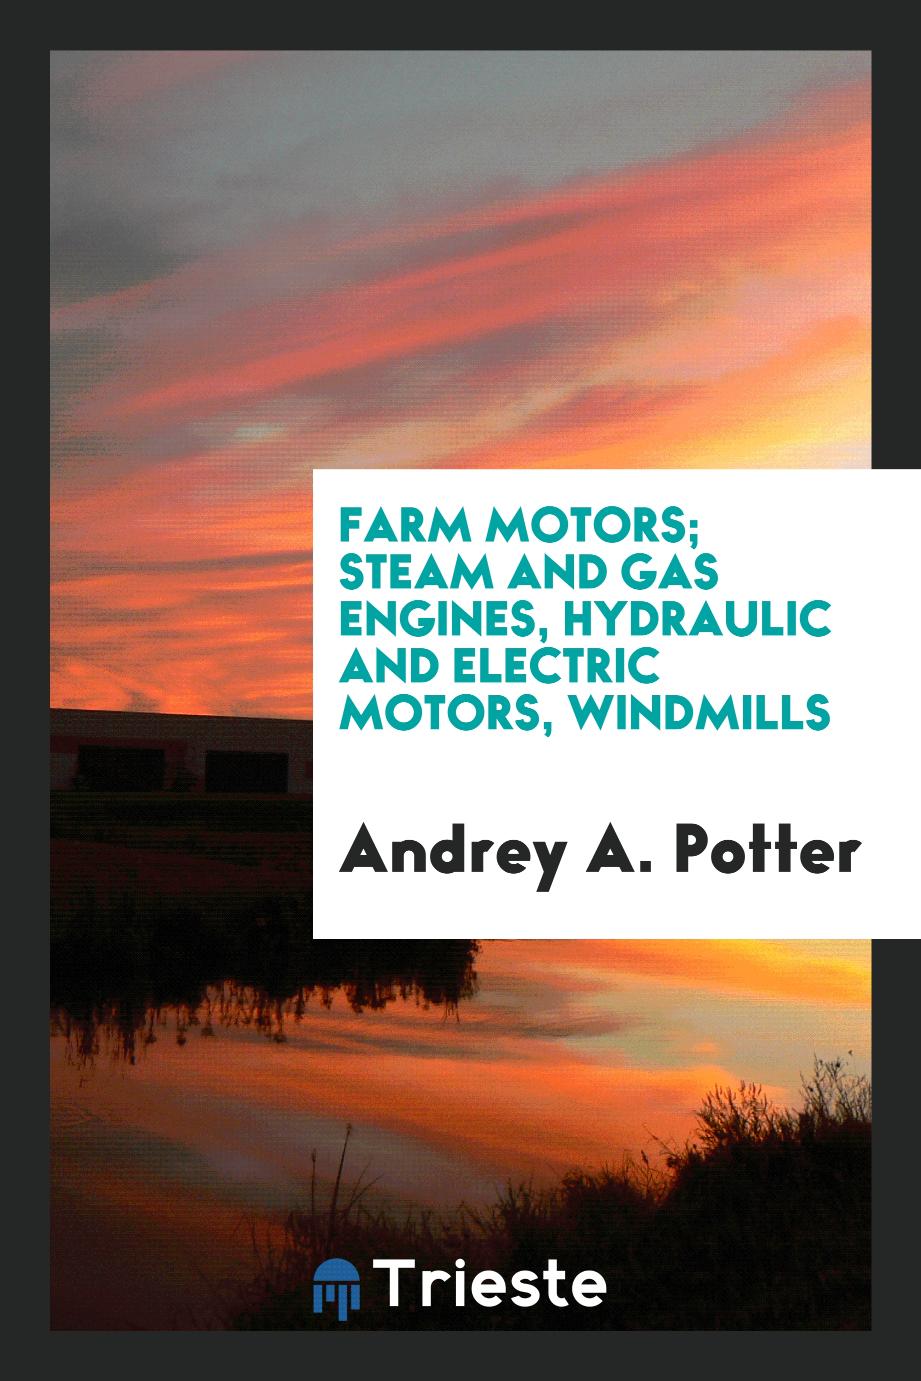 Farm motors; steam and gas engines, hydraulic and electric motors, windmills